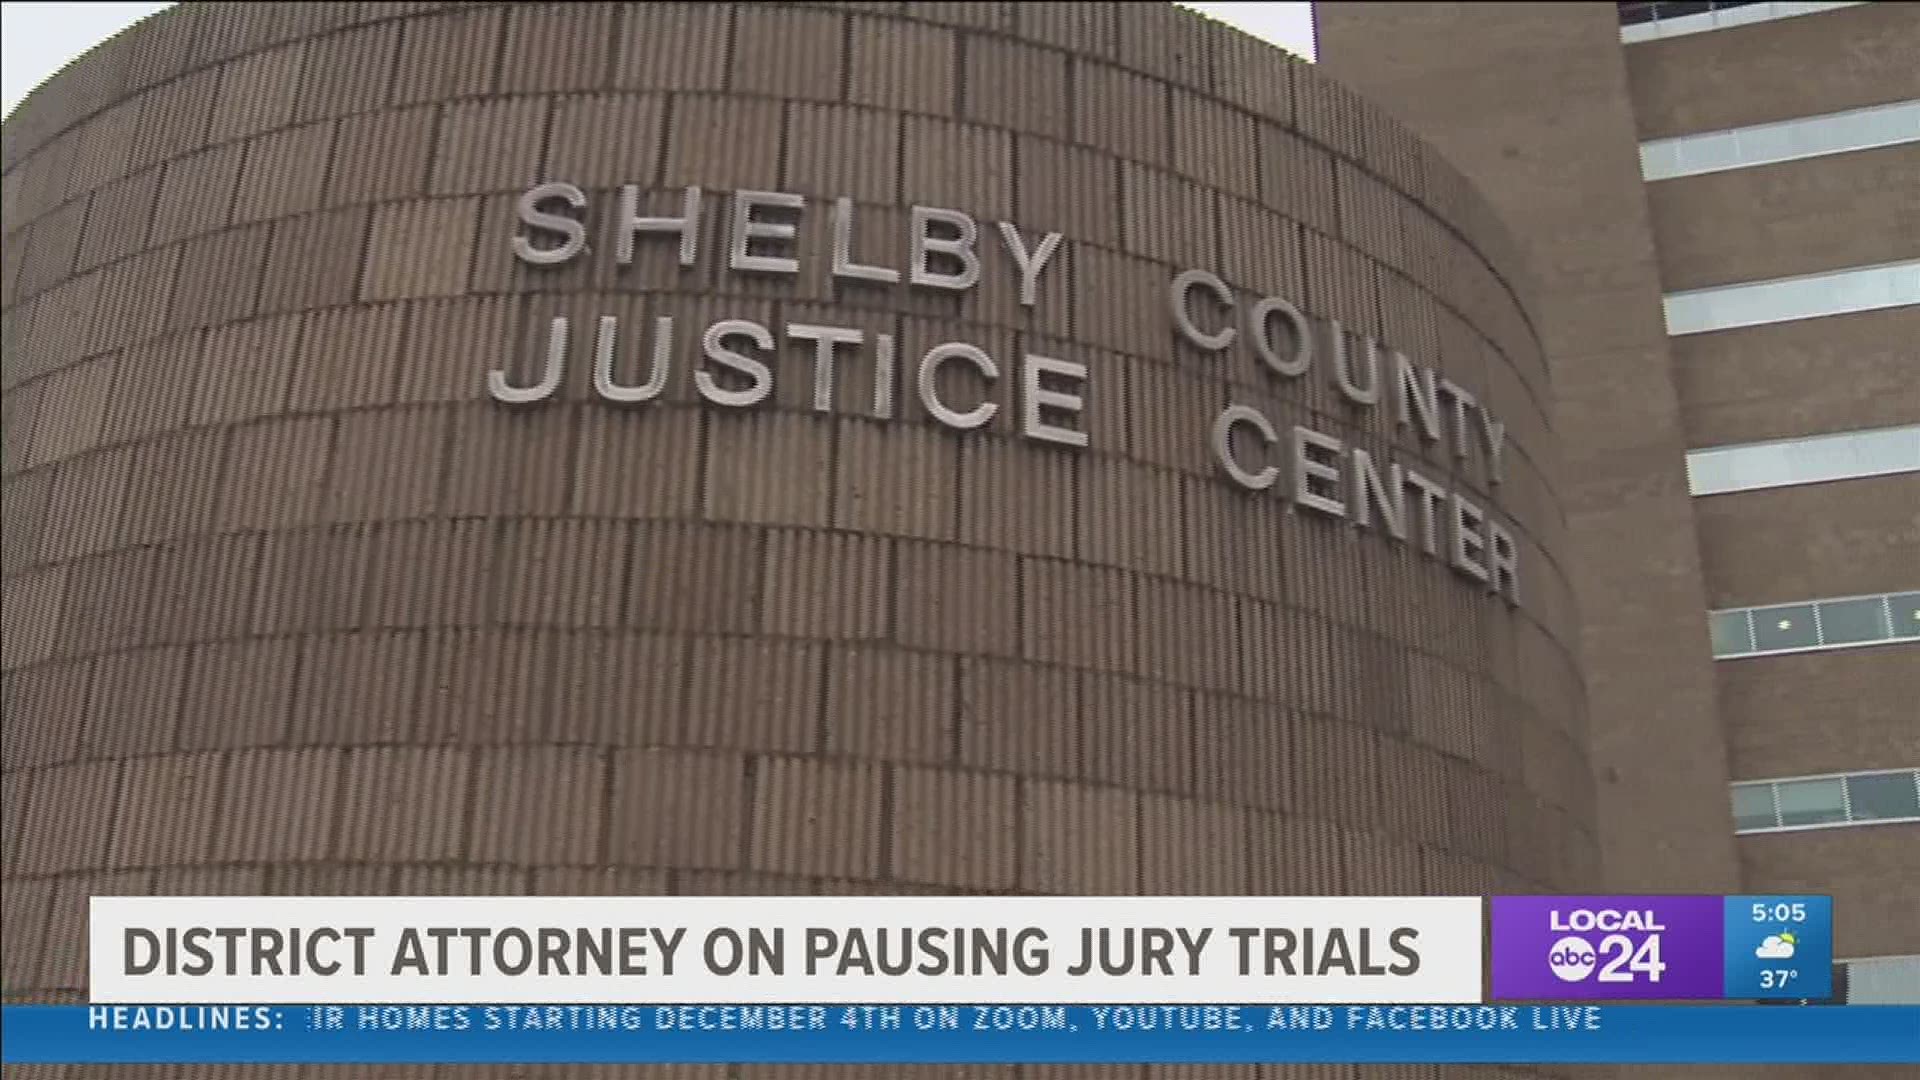 Normally, they have about 200 jury trials every year. This year there have been 20.